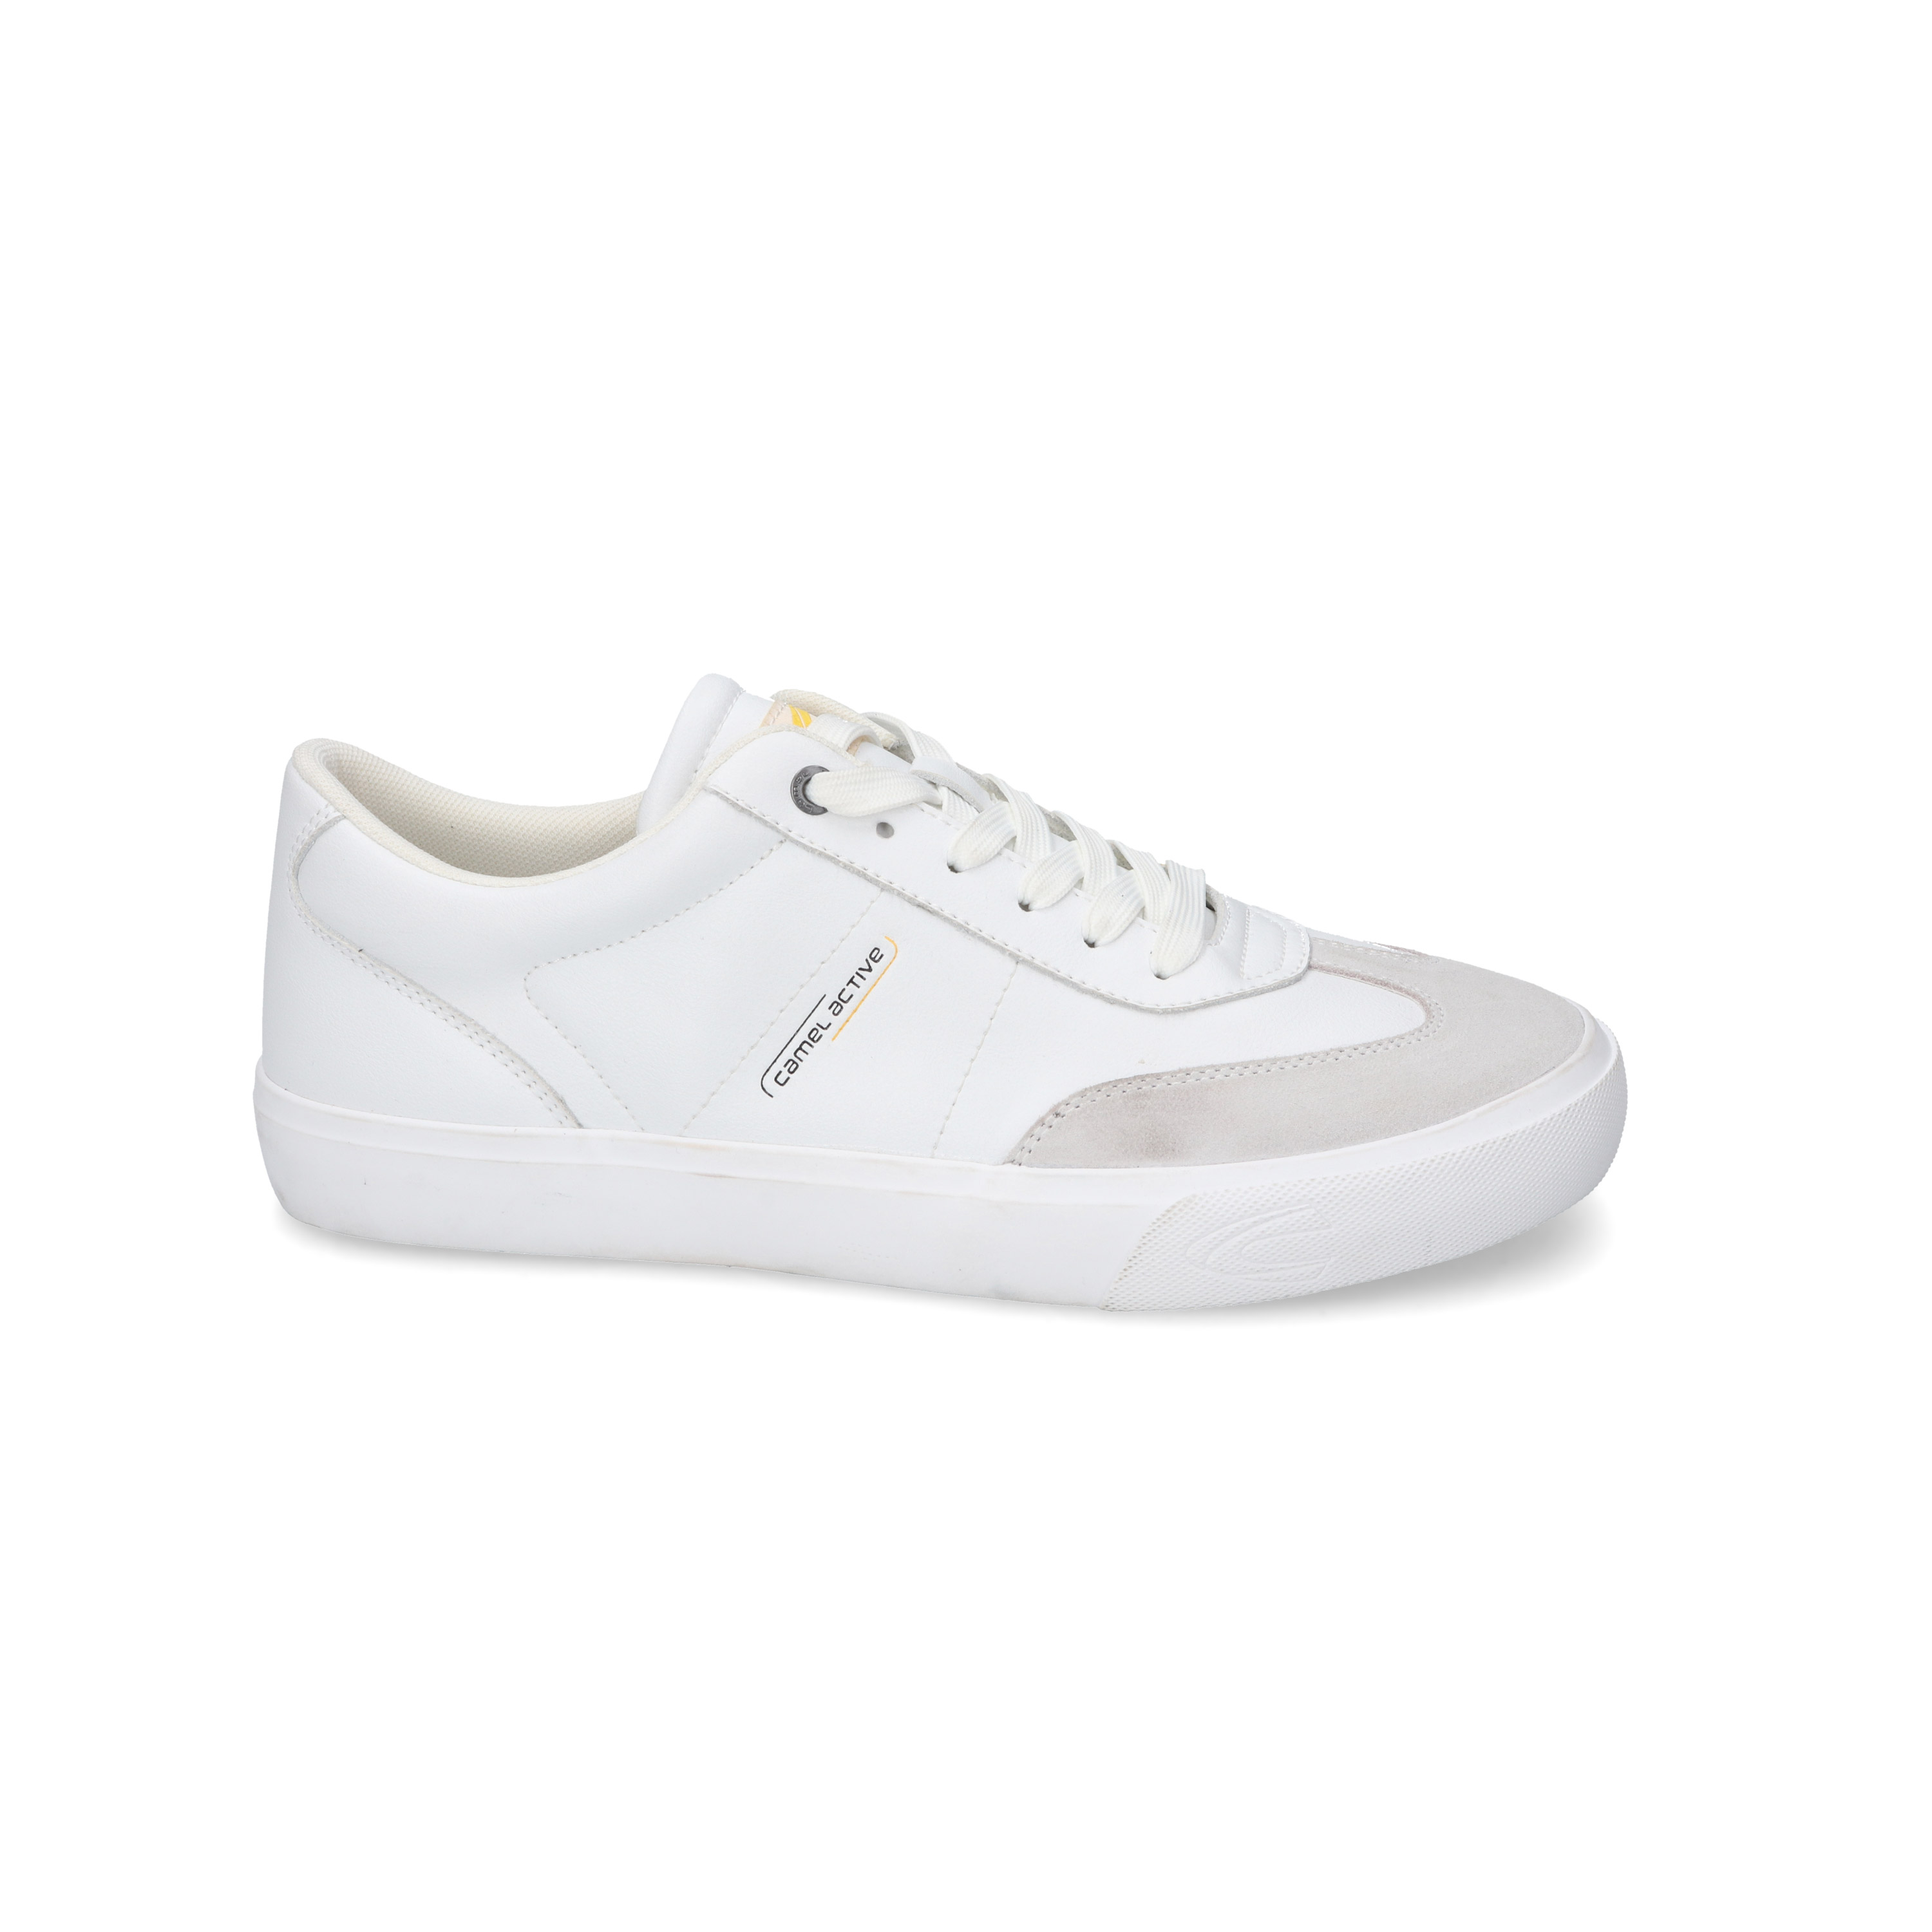 Camel Active Sneakers - Offweiß Nappa